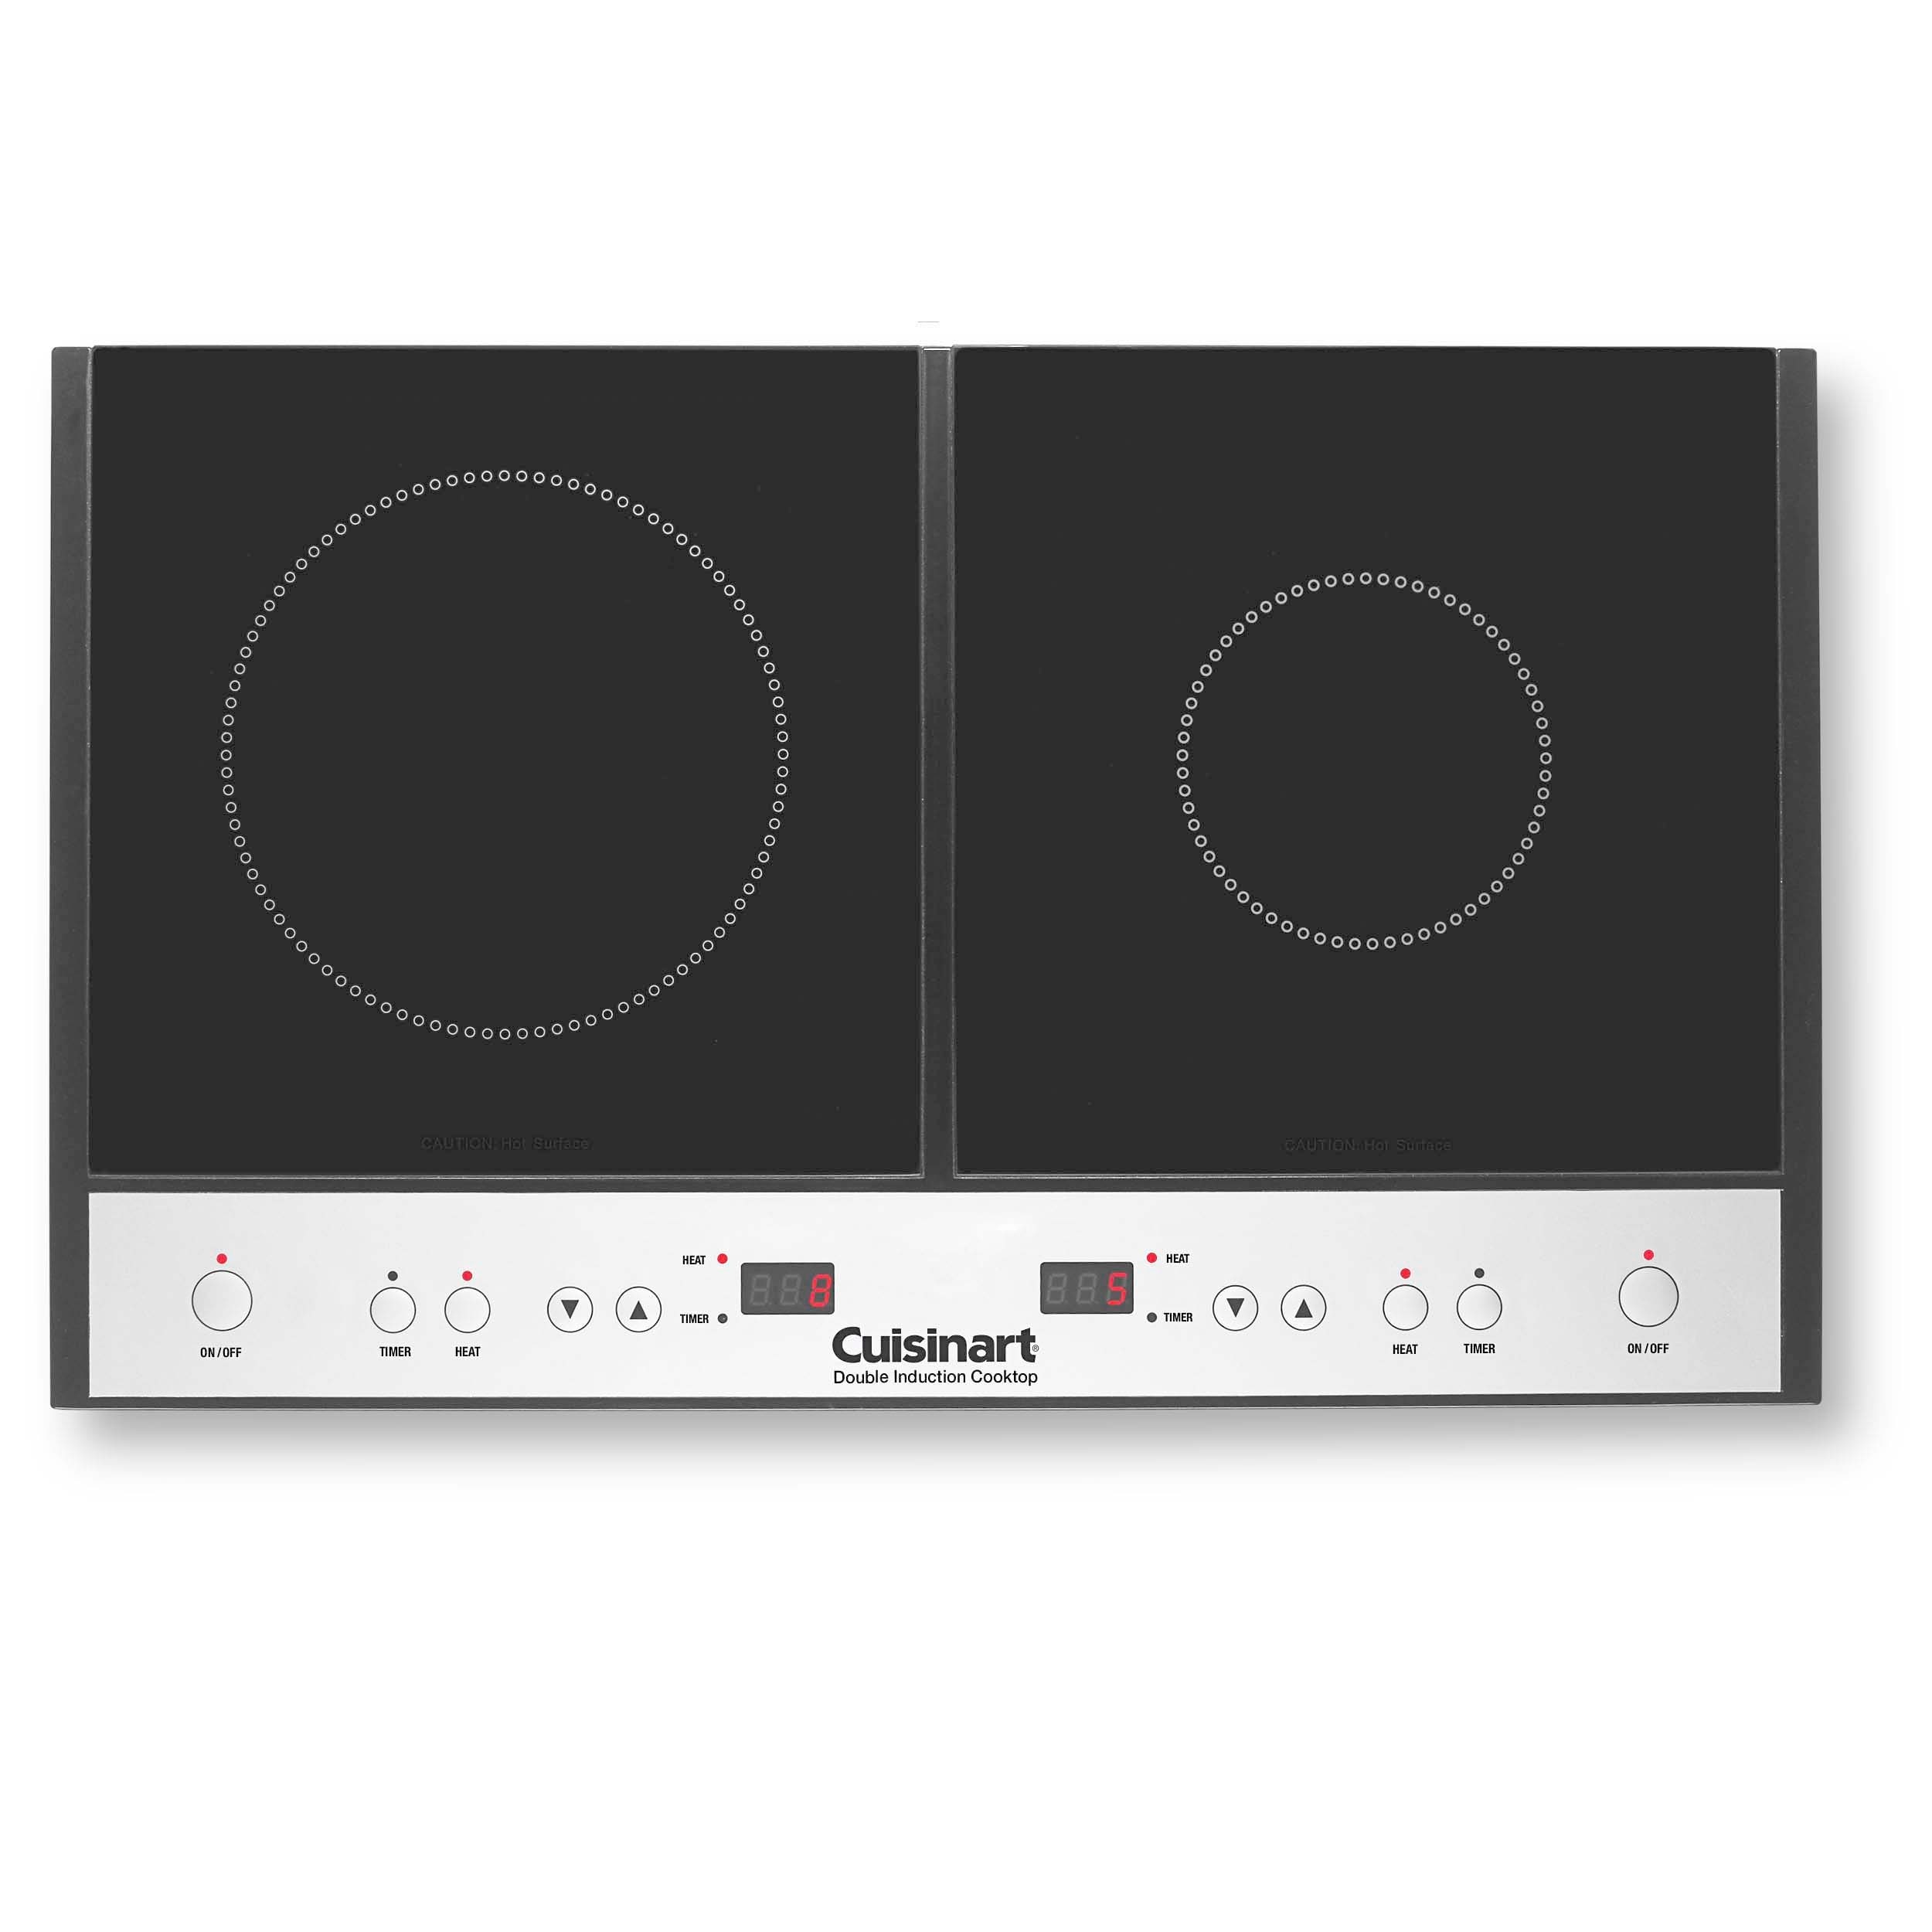 https://ak1.ostkcdn.com/images/products/is/images/direct/cb5a01ee0f40d9a88bd53000aea7a6ce6886b3b3/Cuisinart-ICT-60P1-Double-Induction-Cooktop.jpg